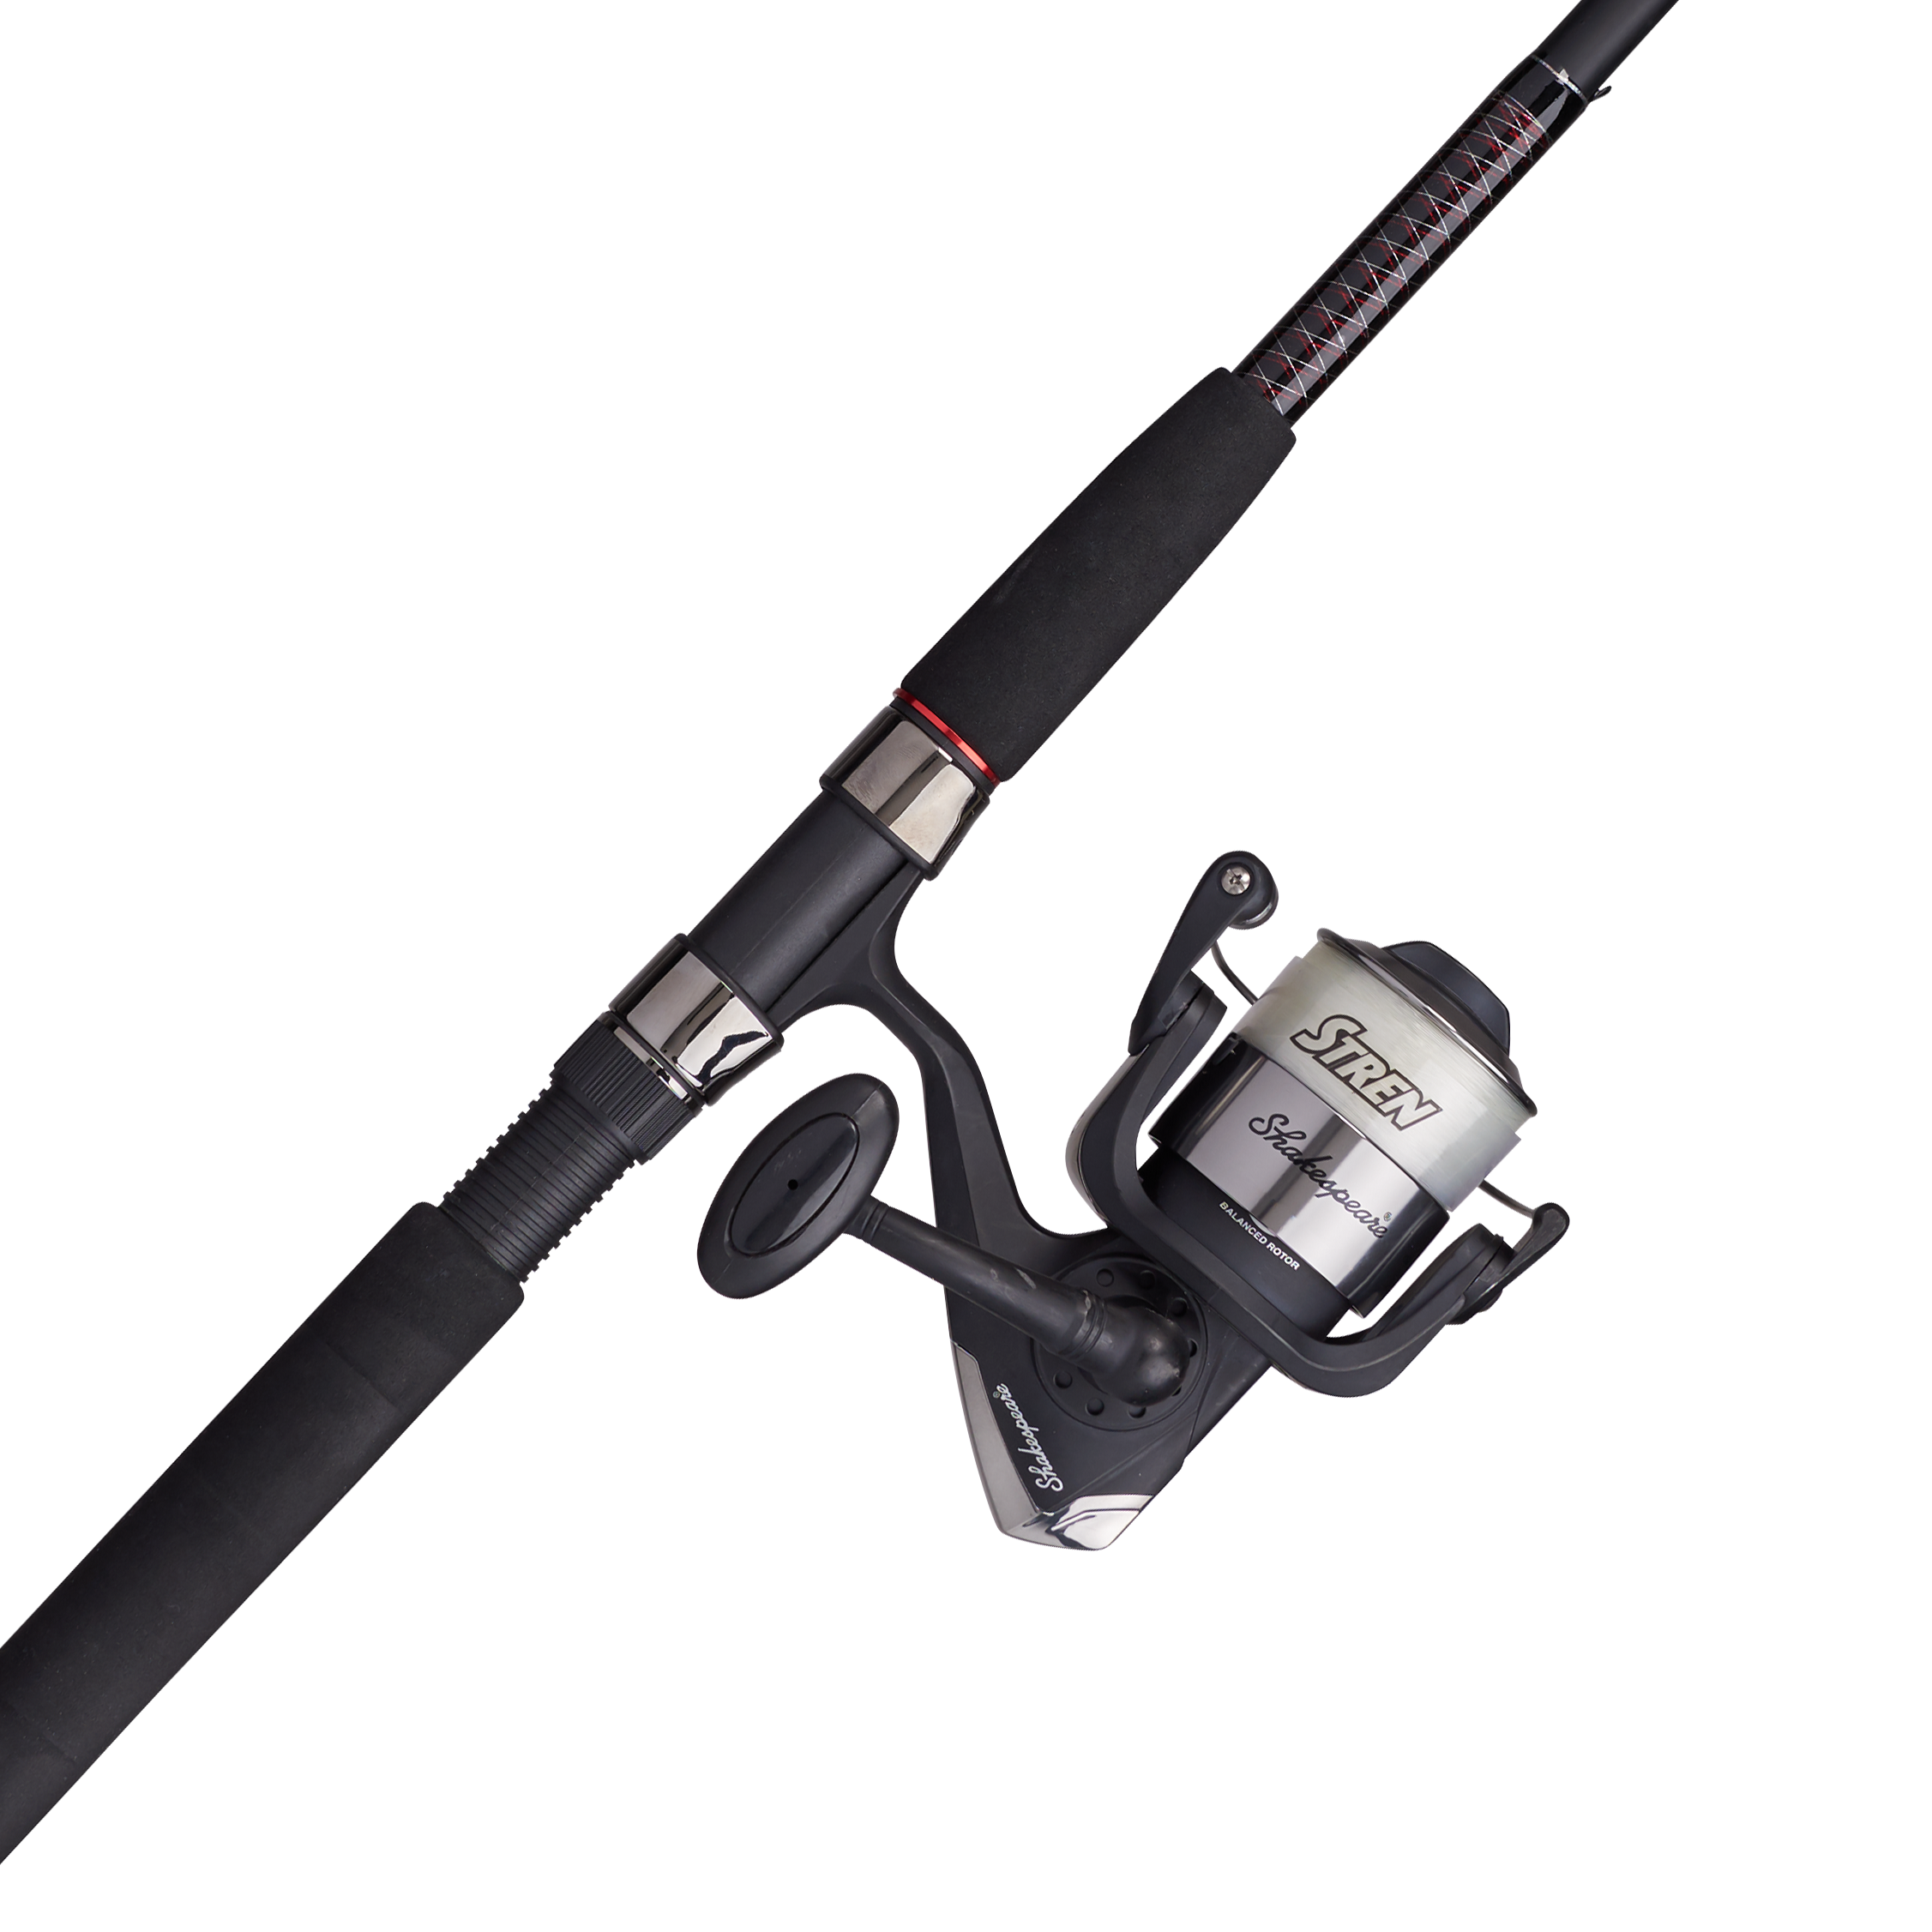 Ugly Stik GX2 PRE-SPOOLED 1pc Rod/Reel Spinning Combo